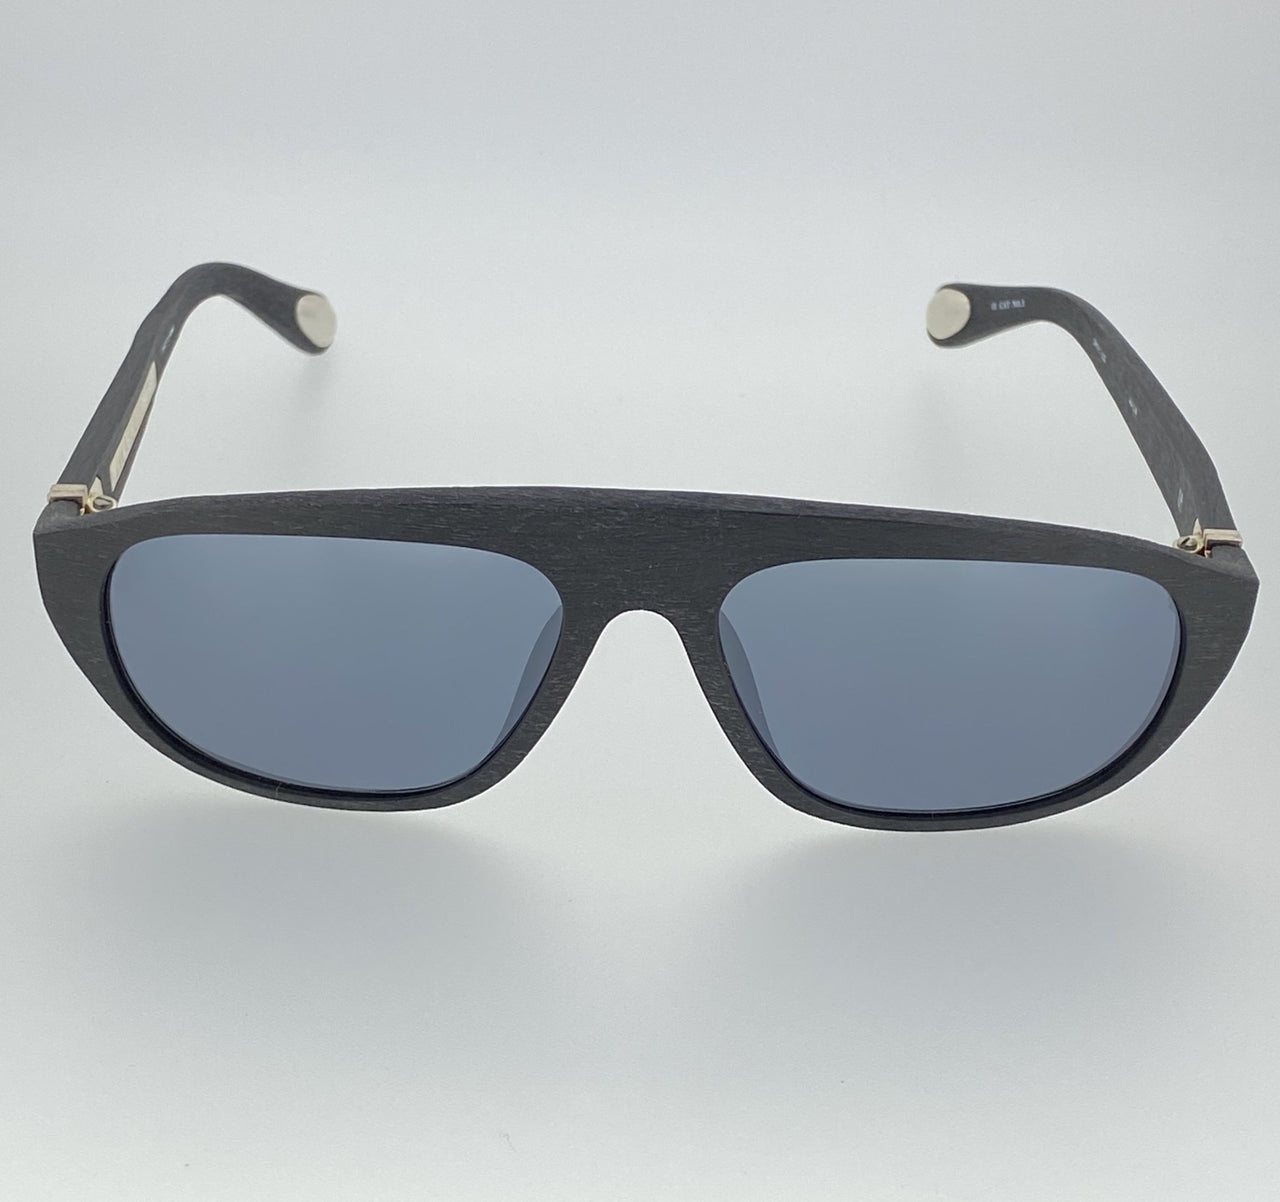 Ann Demeulemeester Sunglasses Scratch Black 925 Silver with Grey Mirror Lenses CAT3 AD1C8SUN - Watches & Crystals